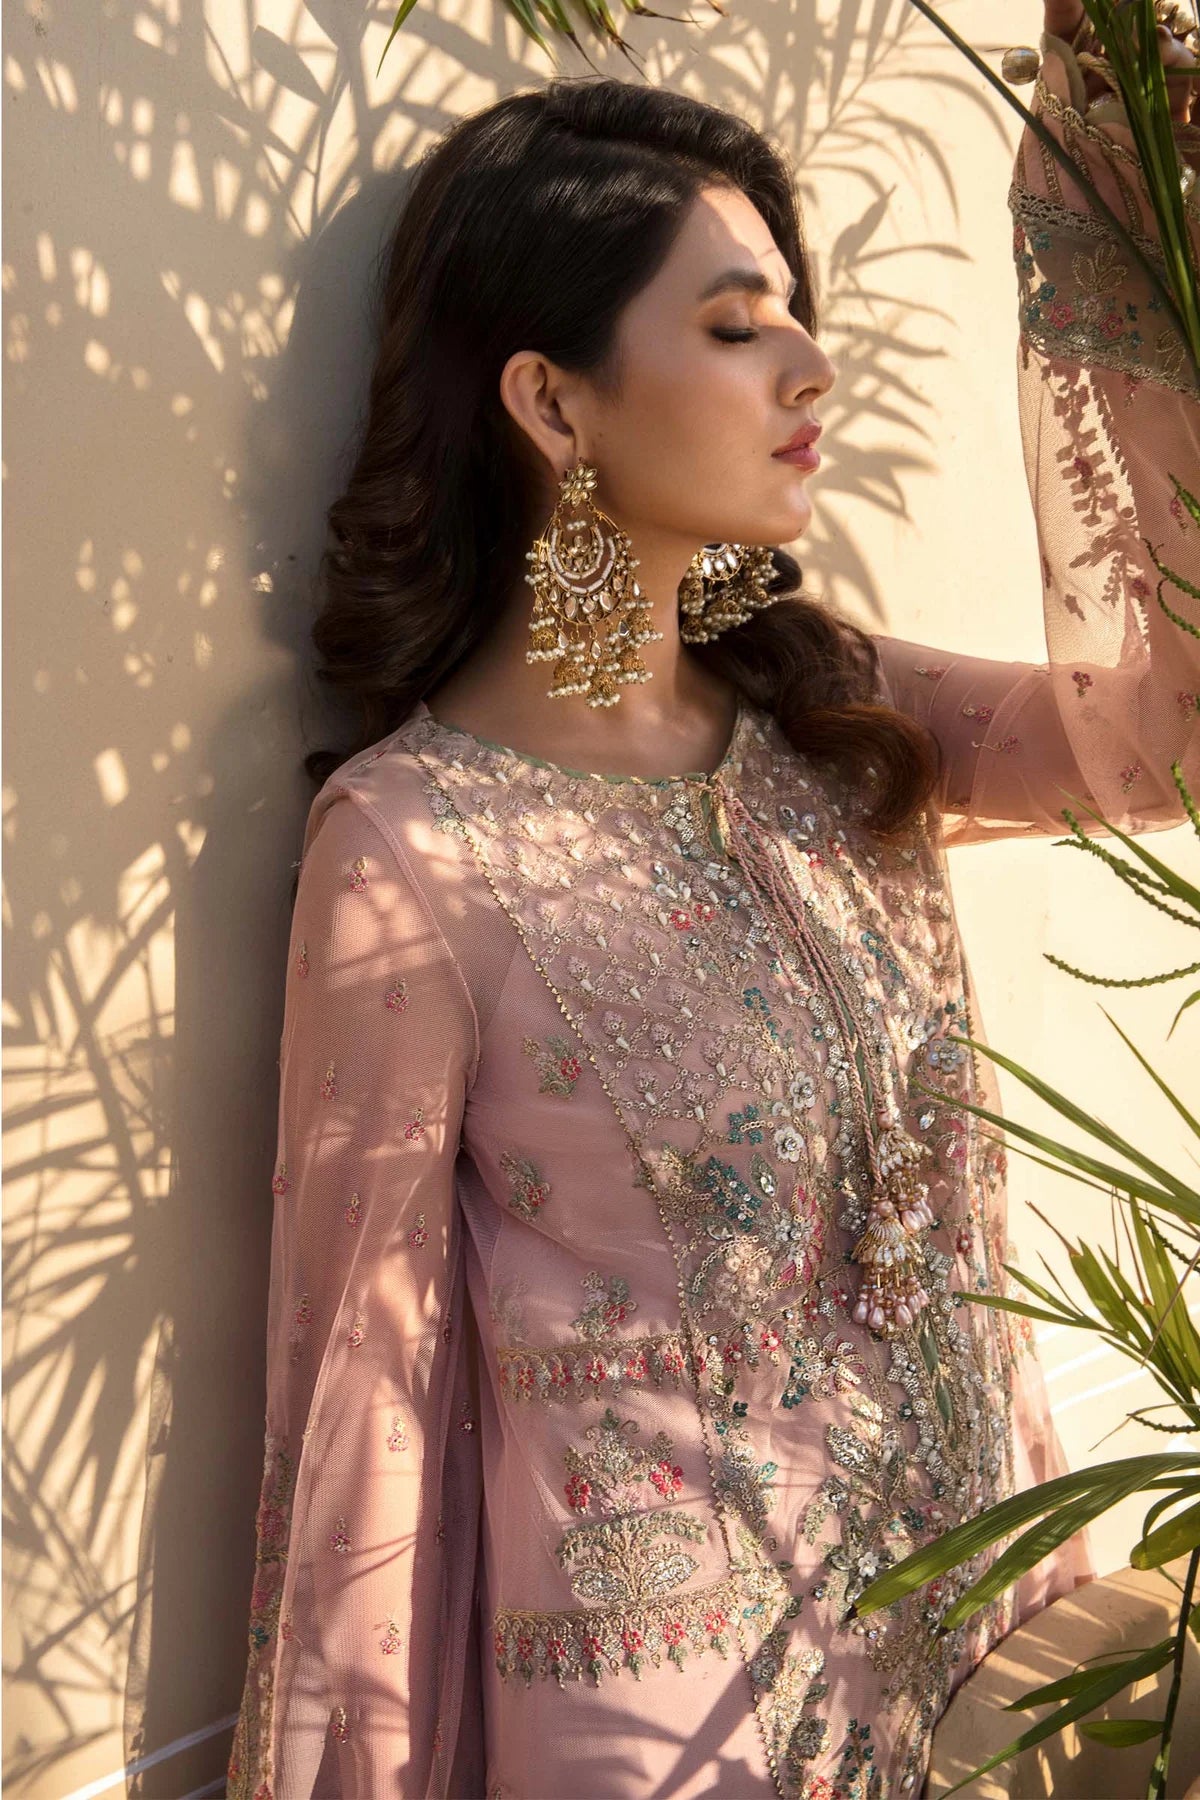 Maria B Inspired Mbroidered Peach 3 Piece Wedding Outfit - Desi Posh